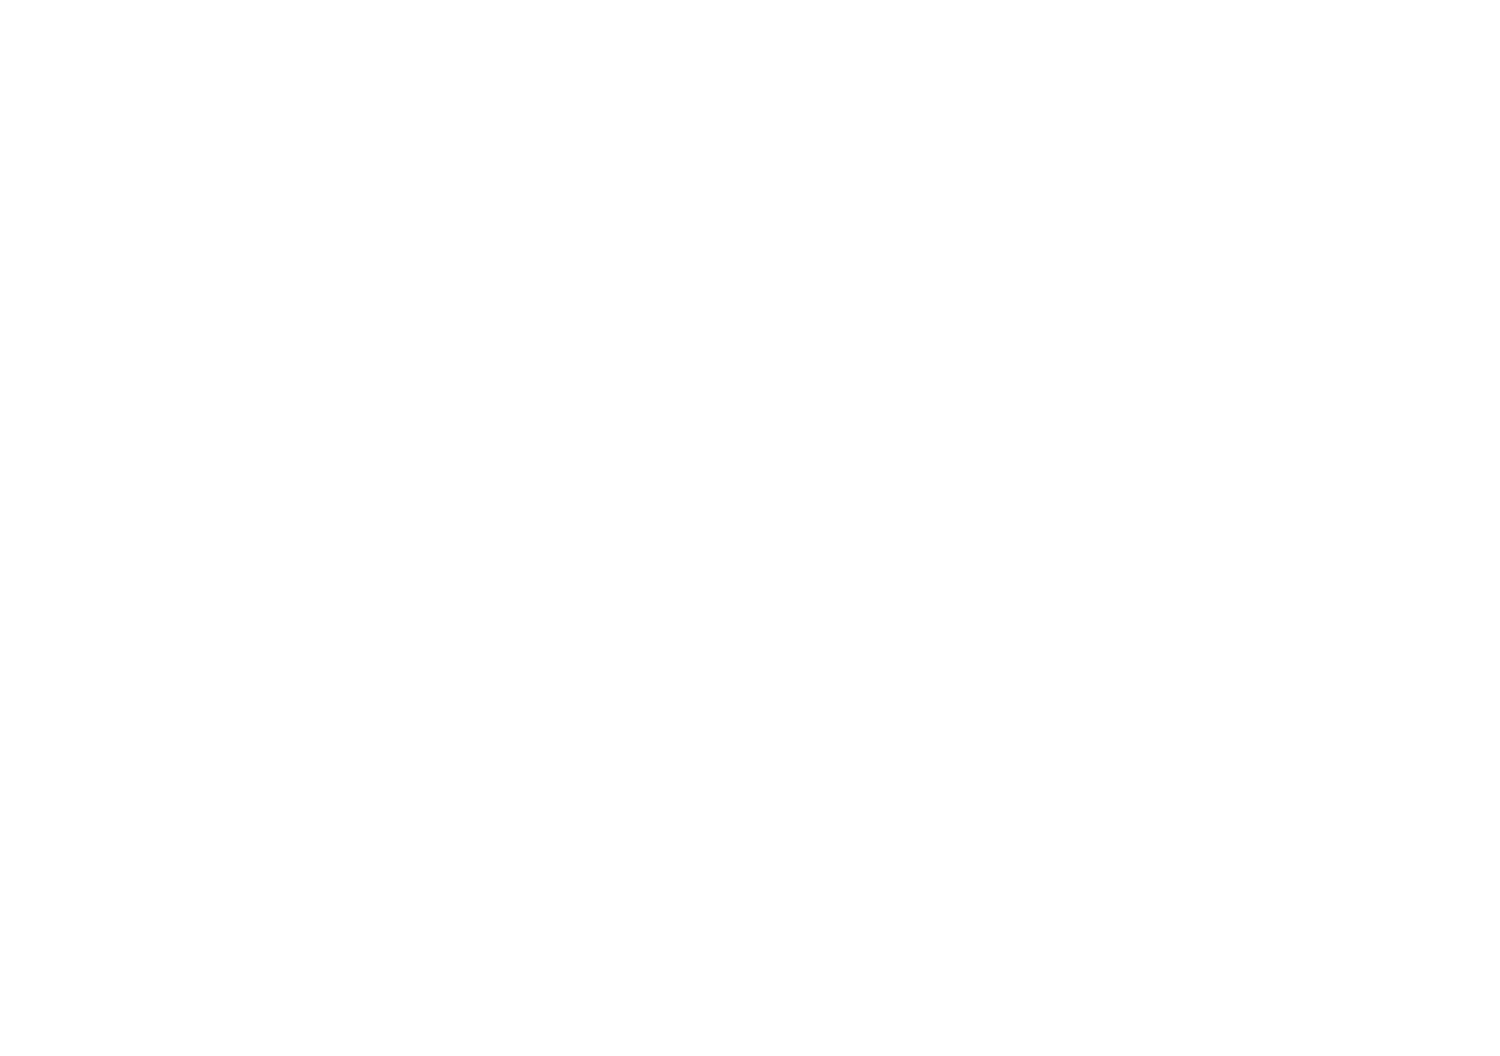 The arena group